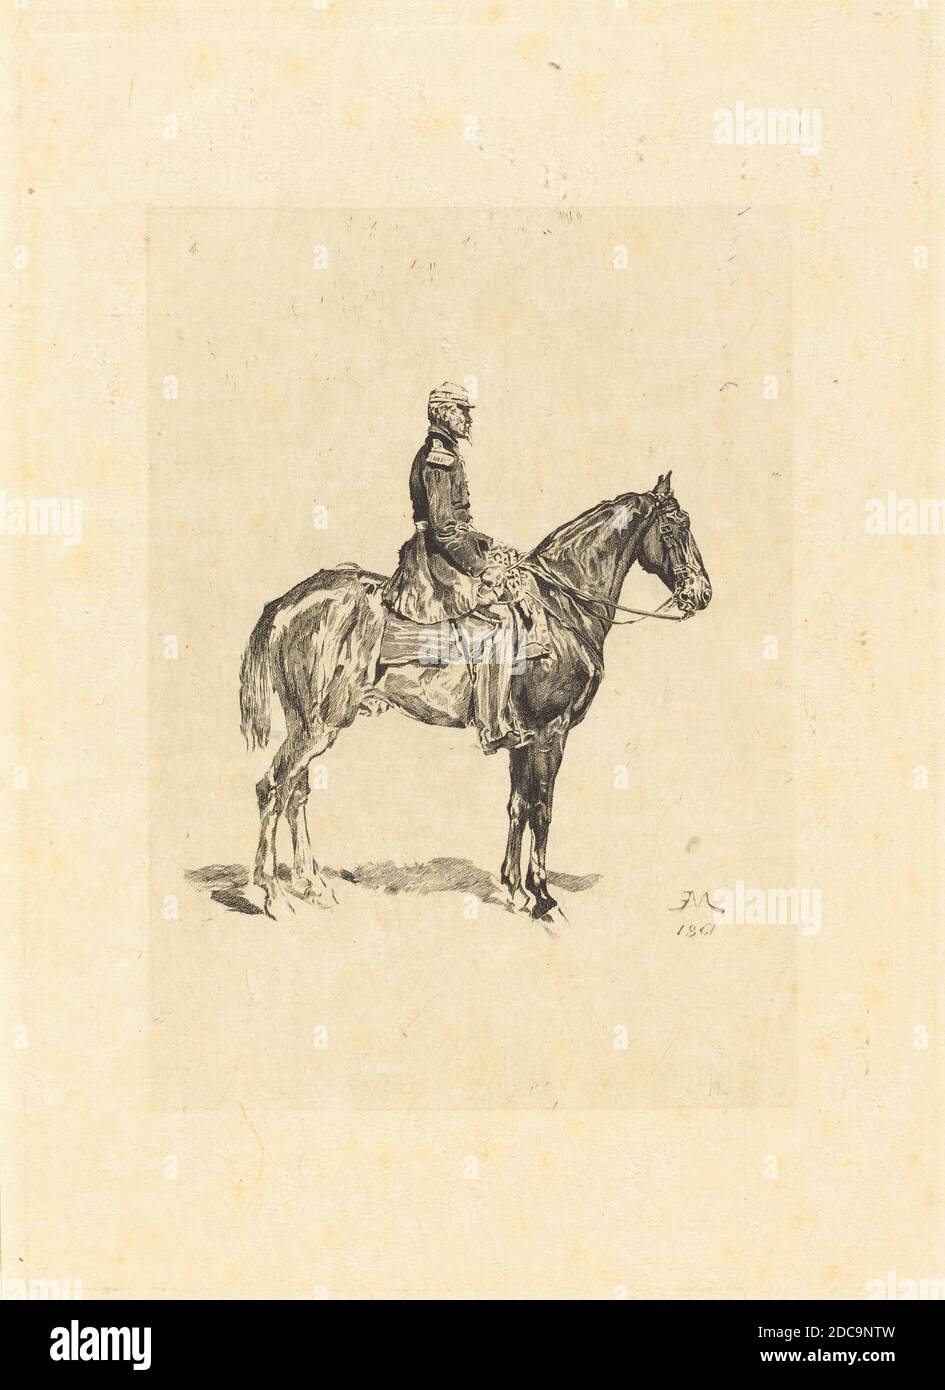 Frederic-Auguste La Guillermie, (artist), French, 1841 - 1934, Jean-Louis-Ernest Meissonier, (artist after), French, 1815 - 1891, Horseman, 1861, etching Stock Photo